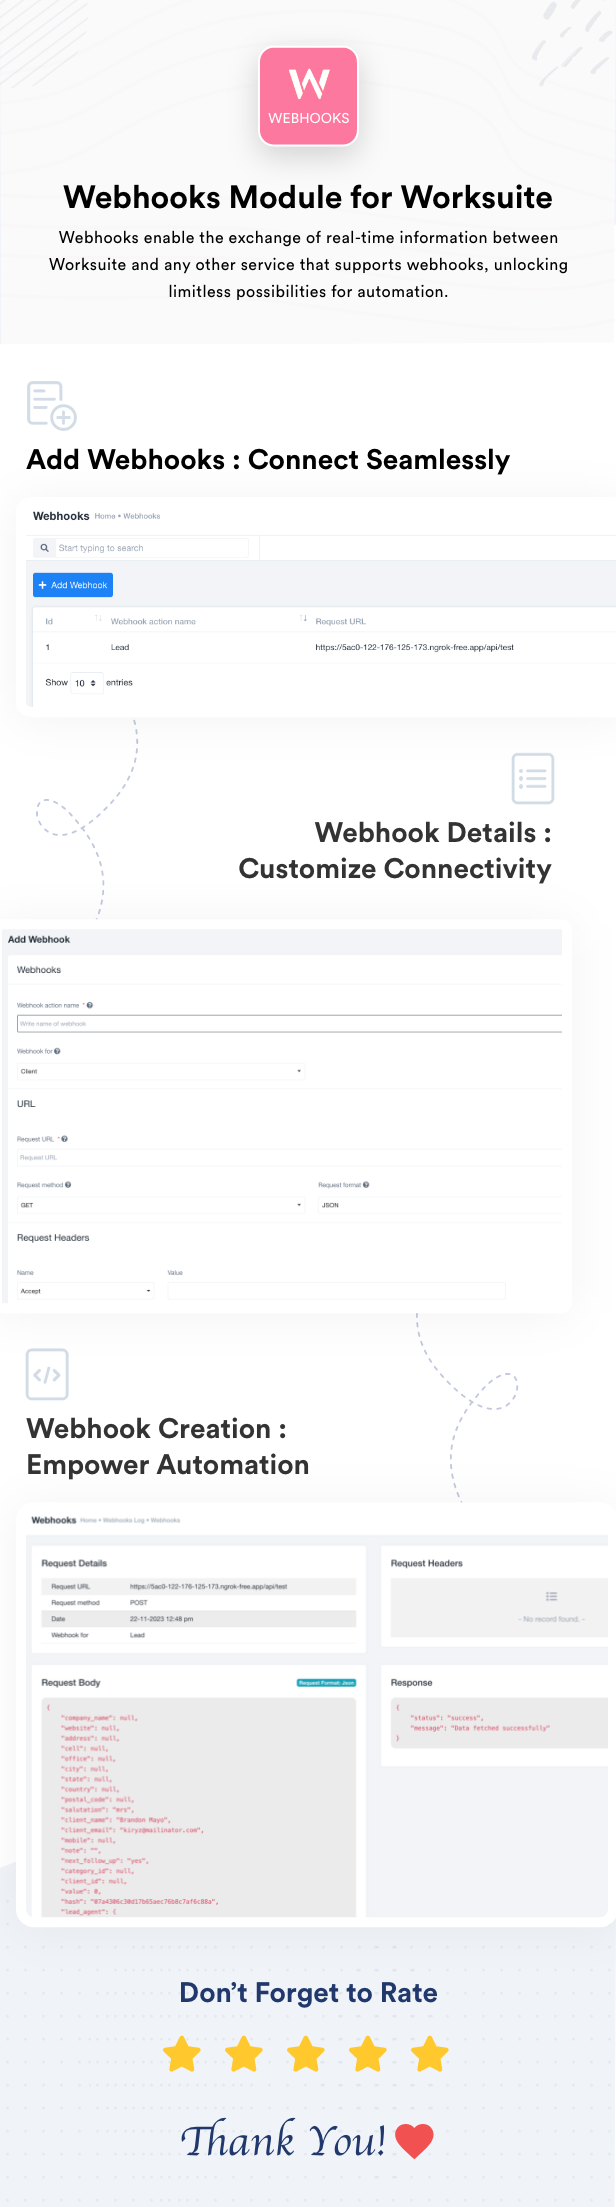 Webhooks Module for Worksuite CRM - 1